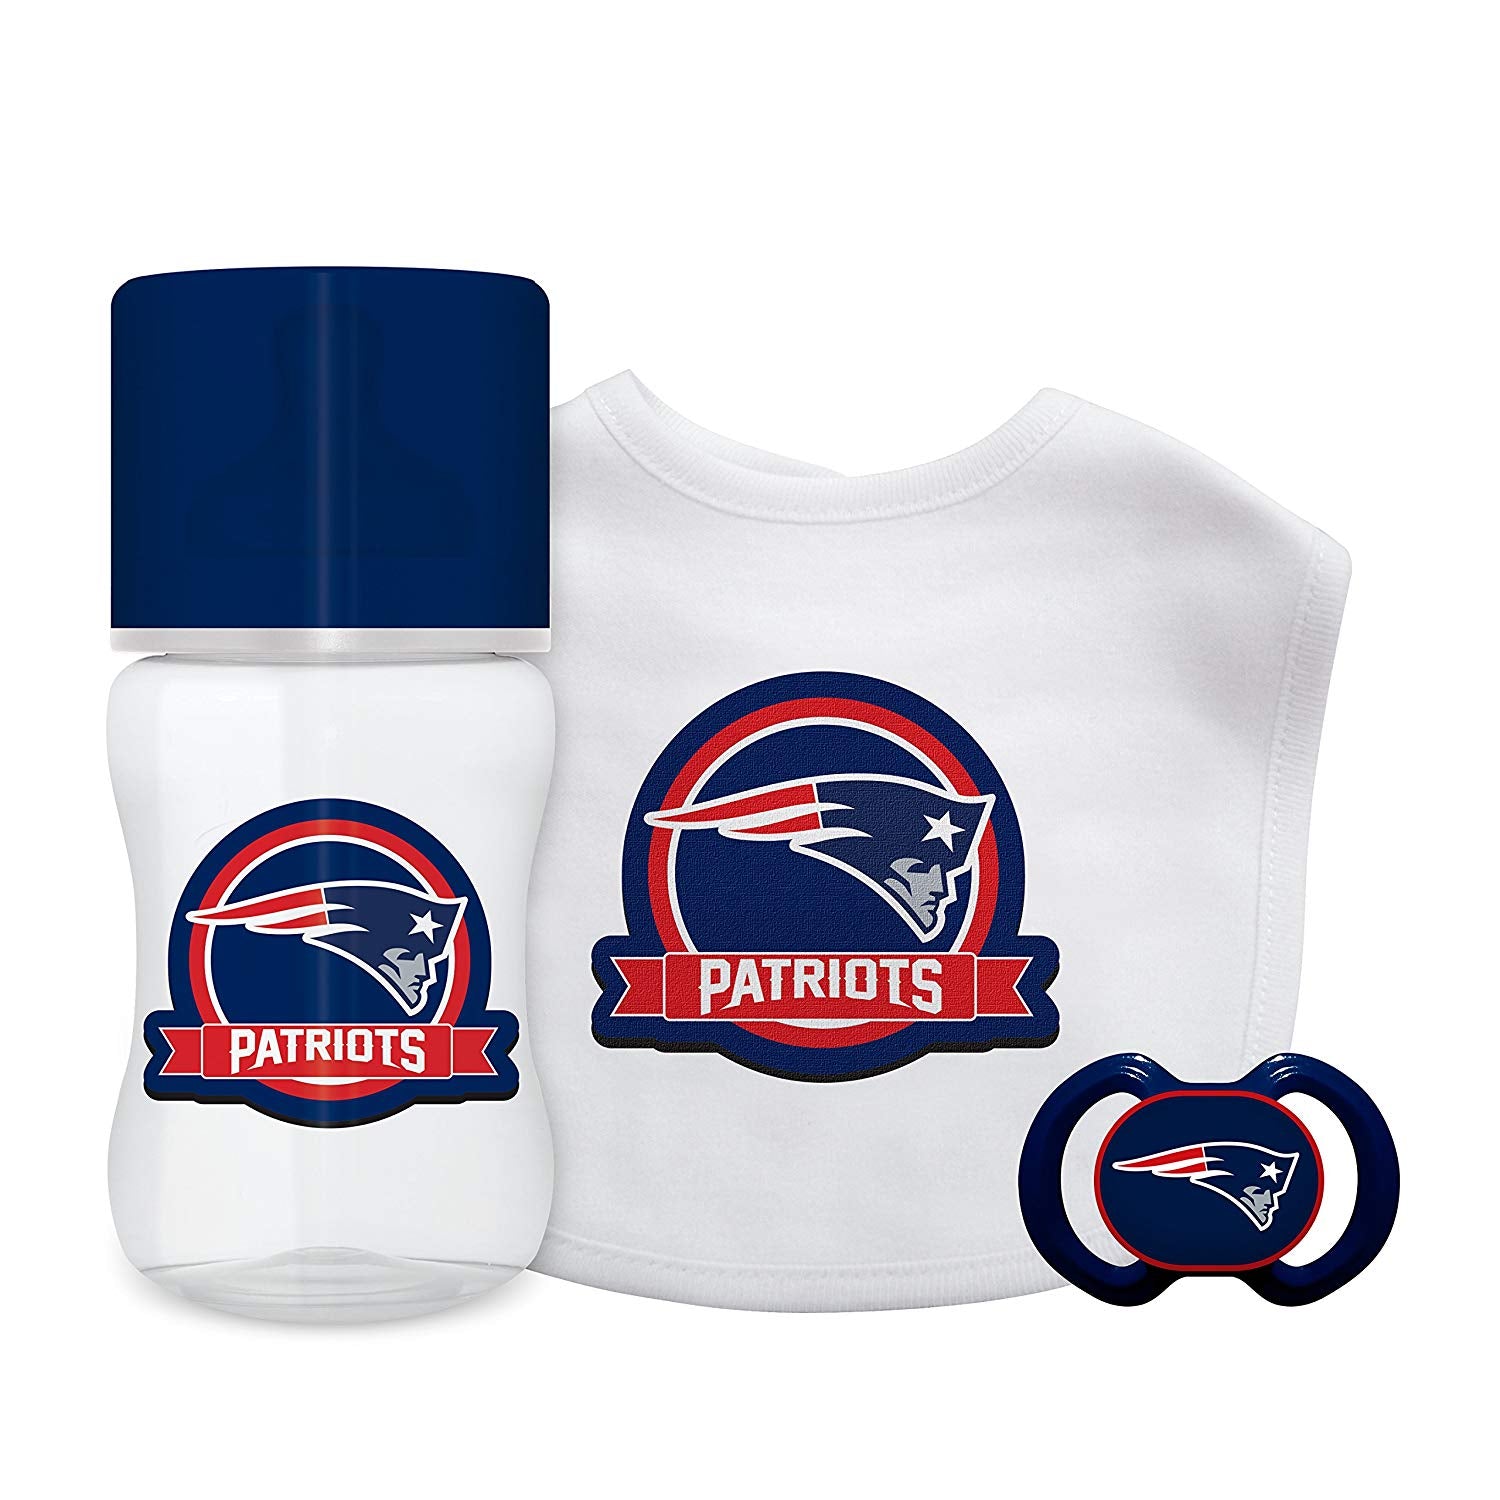 Official Licensed NFL Fan Shop National Football League Team Baby Starter Set - Bottle, Bib Pacifier Set 3 Months and Up. Great for baby pictures